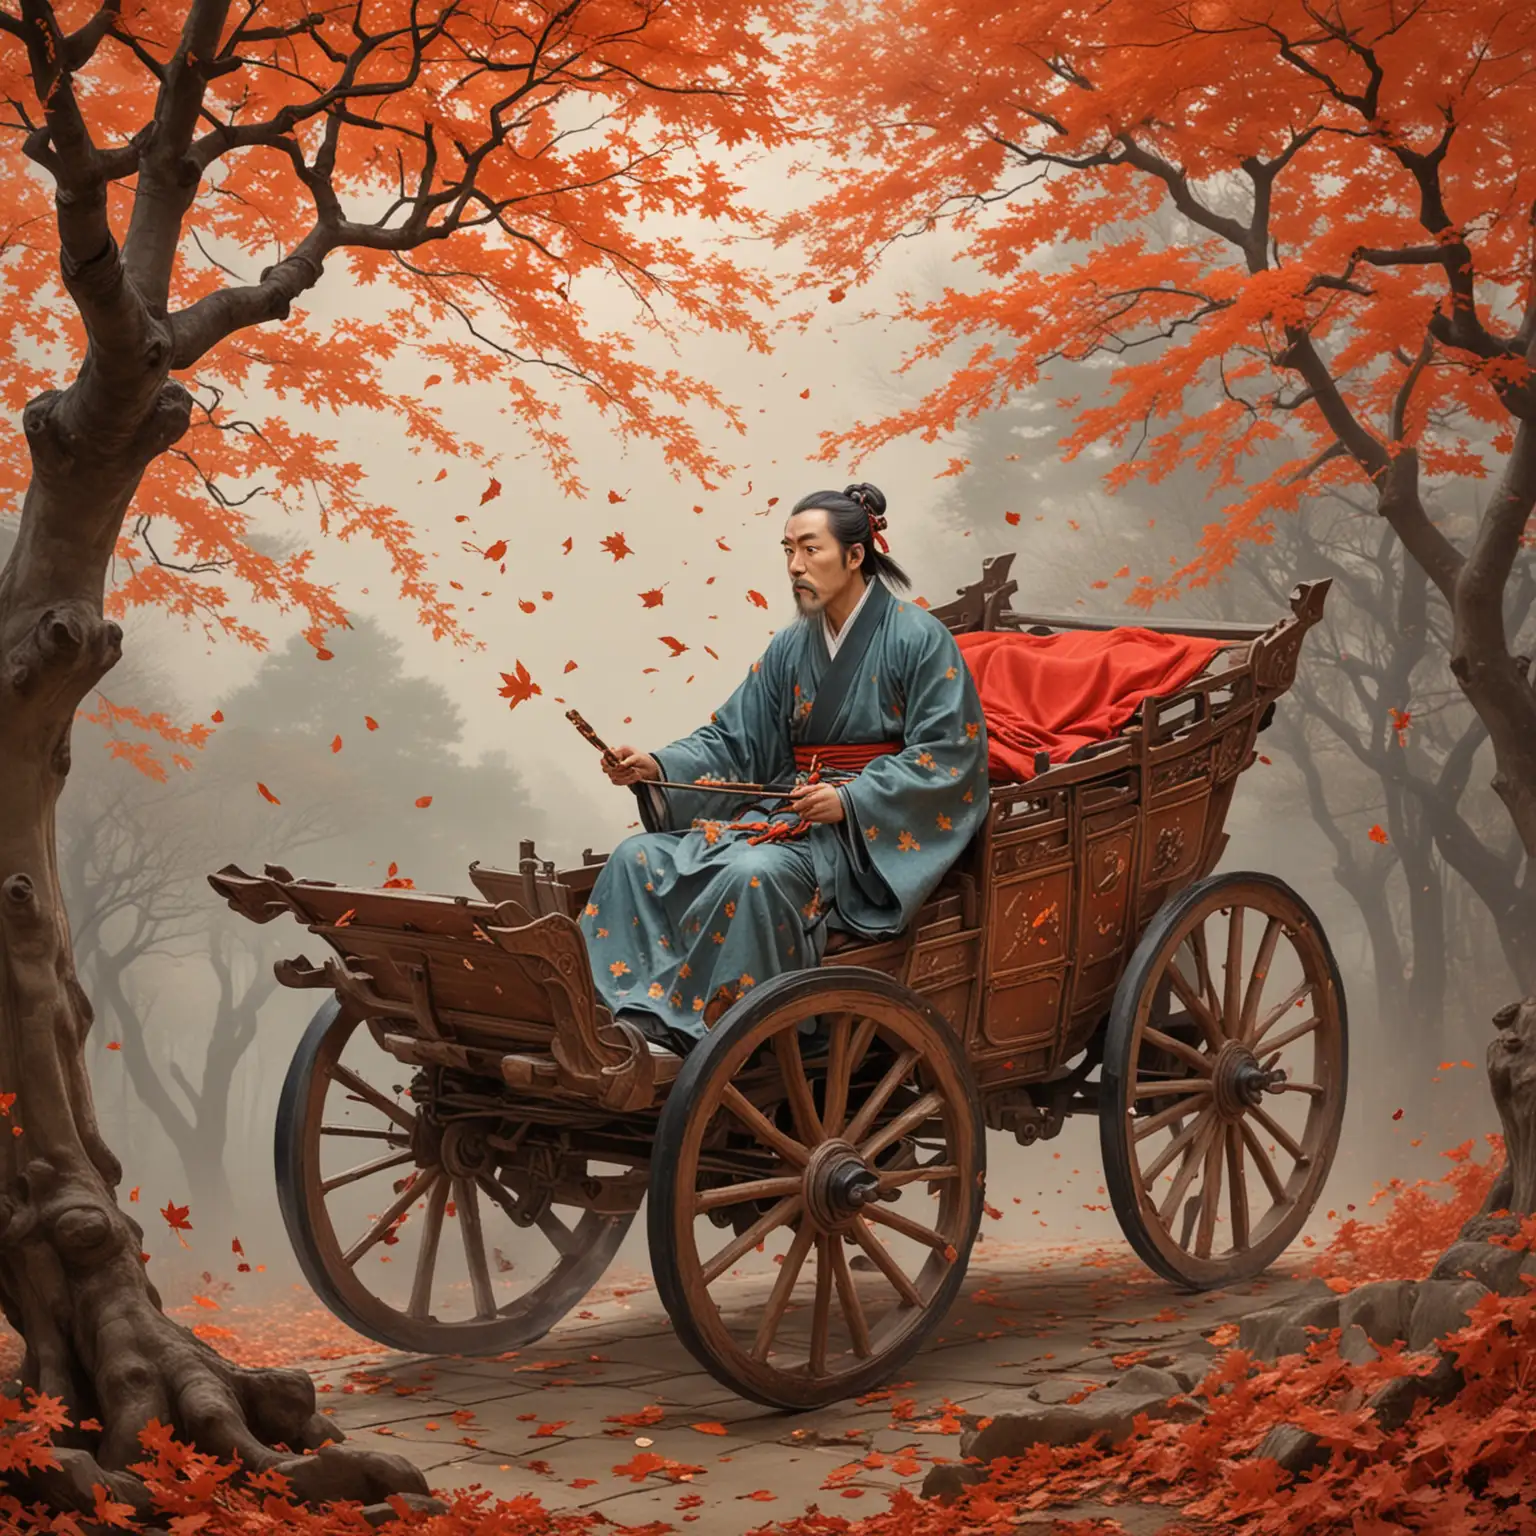 Du Mu sitting in a carriage saw the sky full of maple leaves, so he wrote Shan Xing. Need to show the scene in ancient poetry.